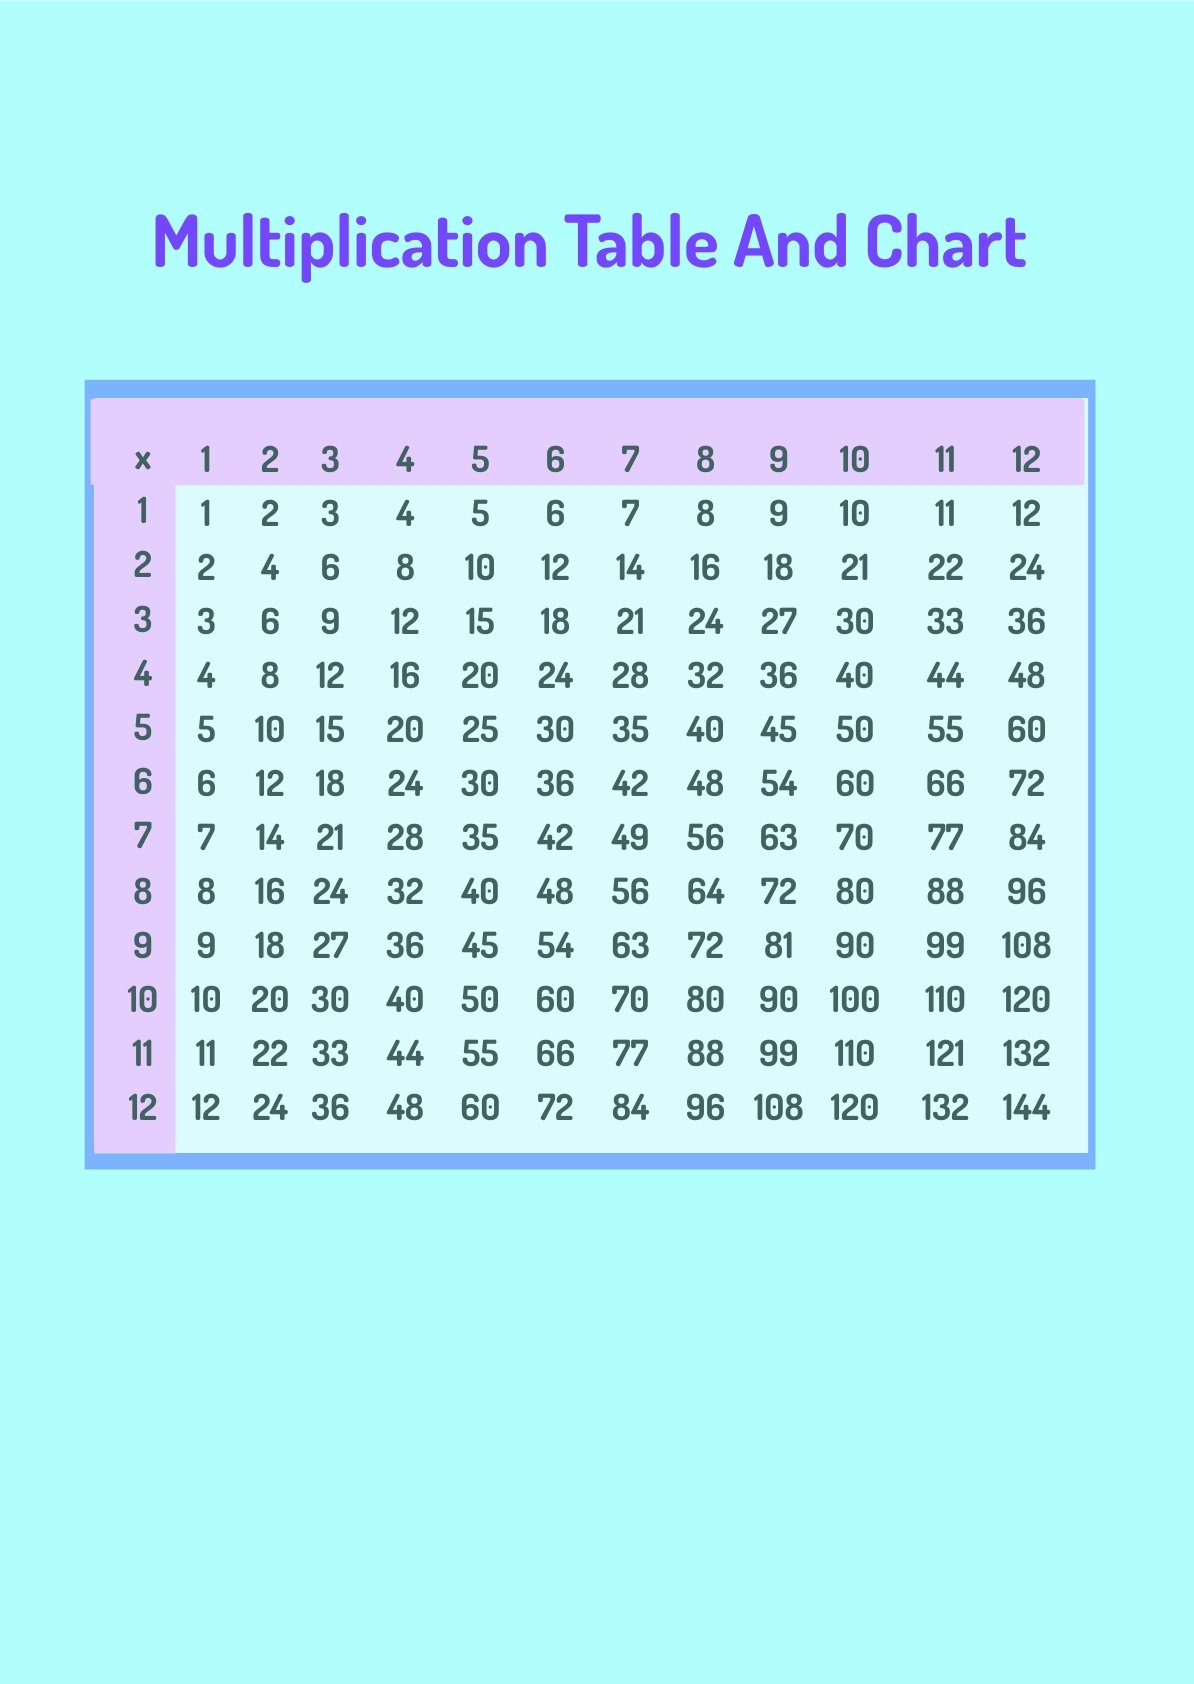 Multiplication Table And Chart in PDF, Illustrator